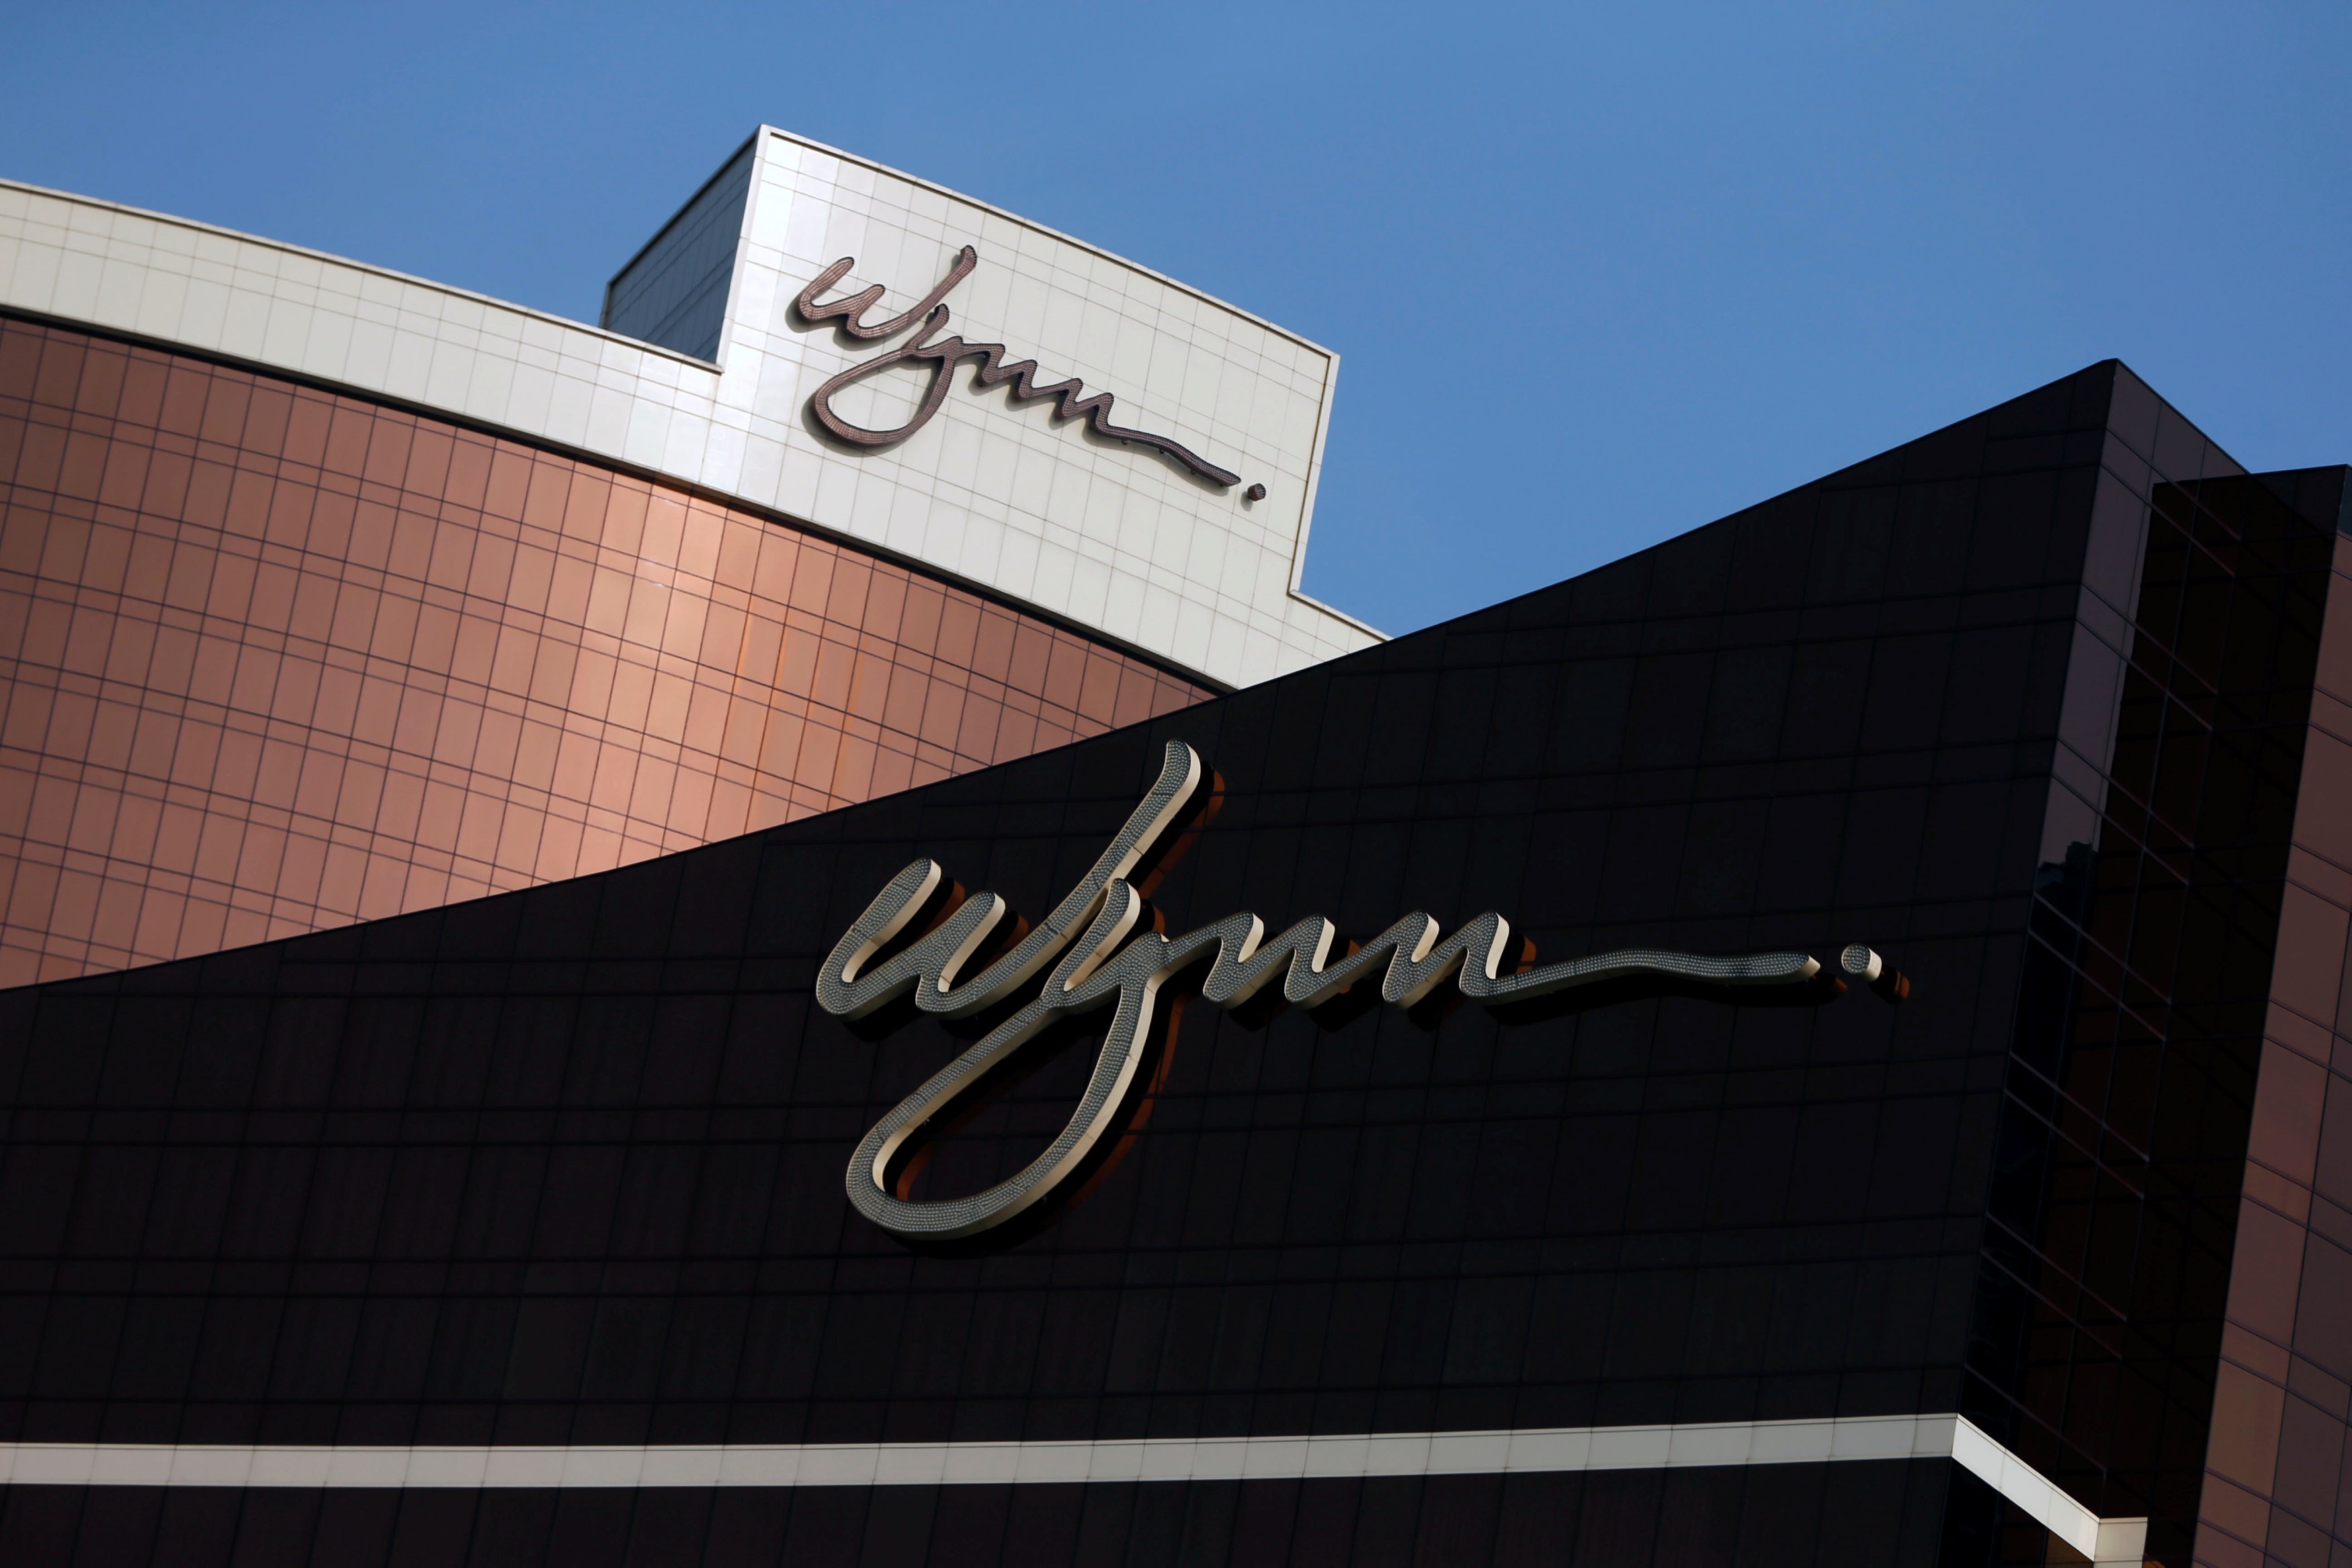 Wynn Peninsula and Wynn Palace (Cotai), as well as a couple of restaurants are still open for the ‘few remaining guests’ in Macau, says Matt Maddox, the CEO of Wynn Resorts, which operates these hotels. Photo: Reuters